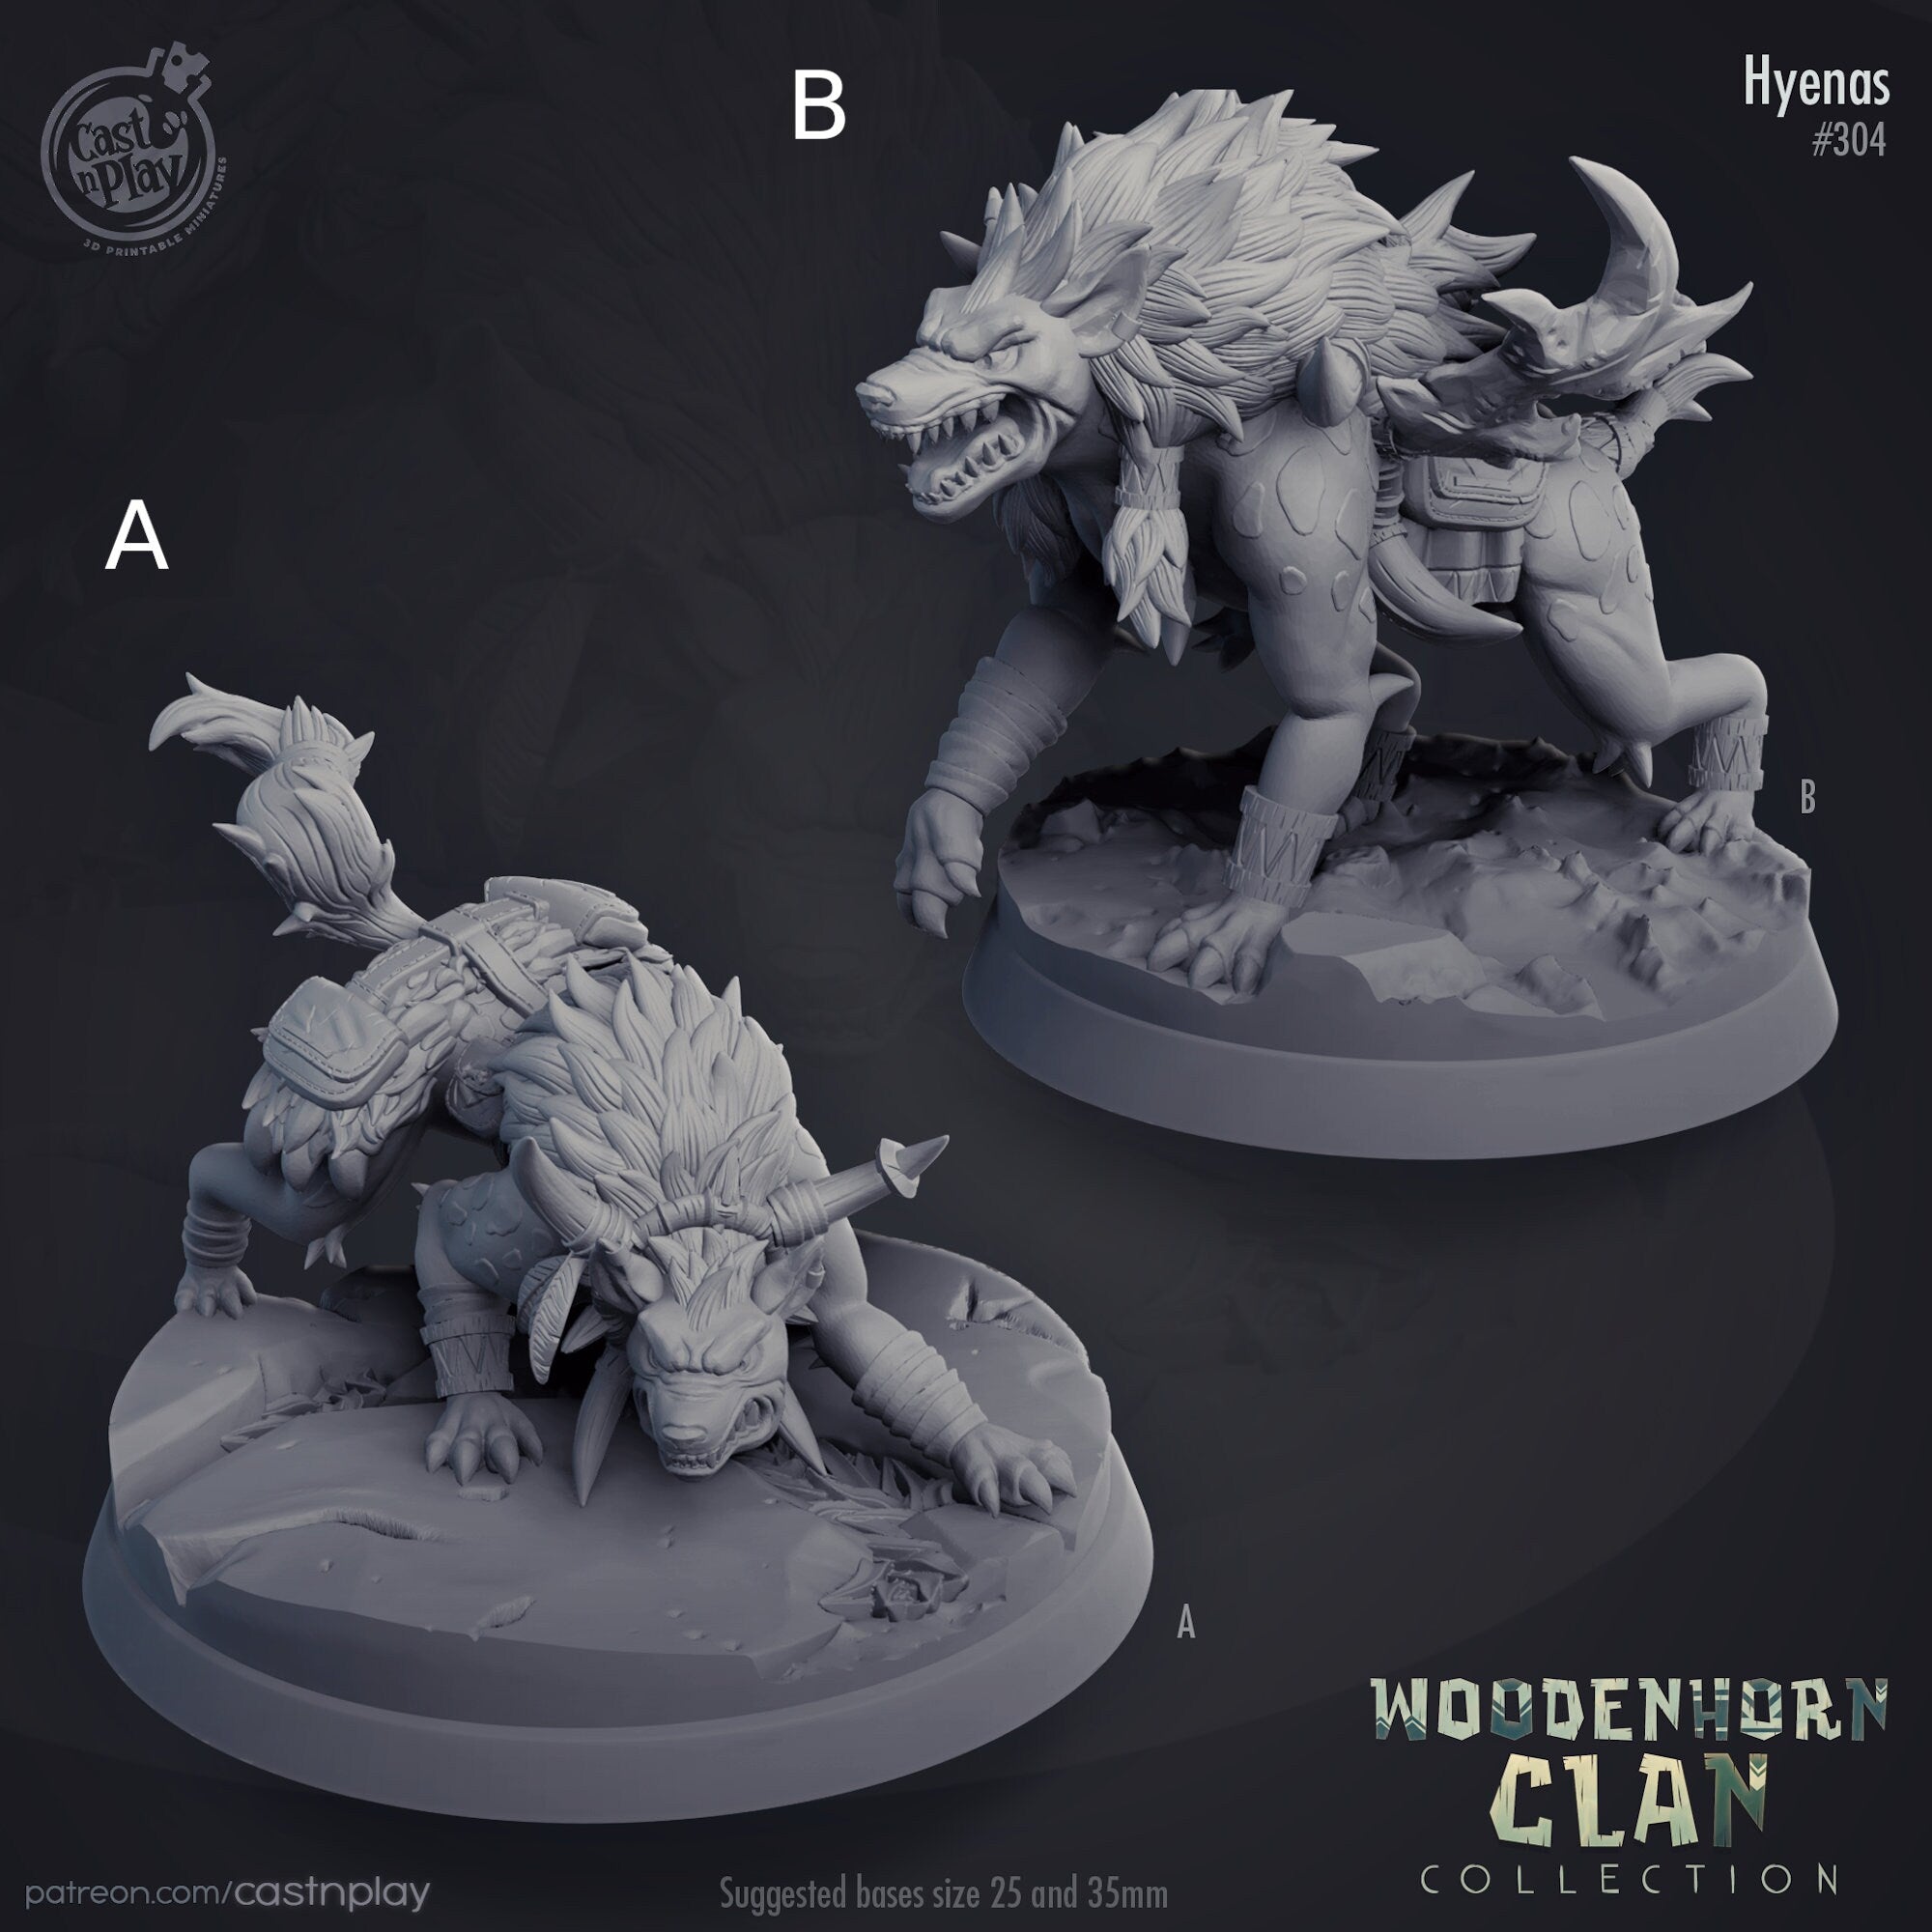 Cast N Play Woodenhorn Clan Hyenas, high quality 3d printed miniature for tabletop games